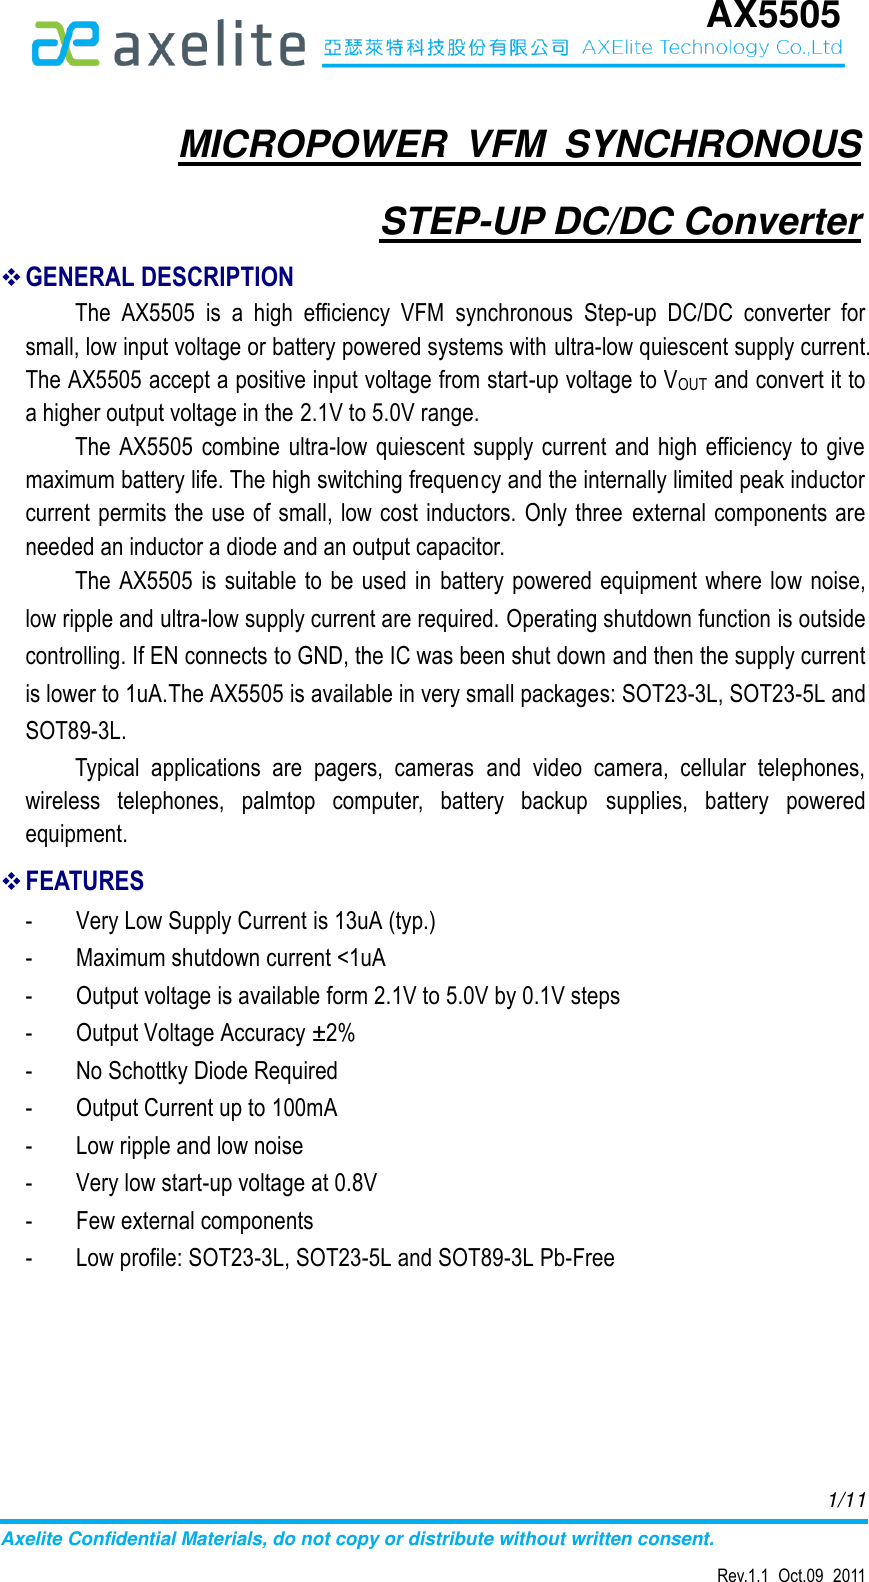 Page 1 of 12 - AX5505 - Datasheet. Www.s-manuals.com. R1.1 Axelite